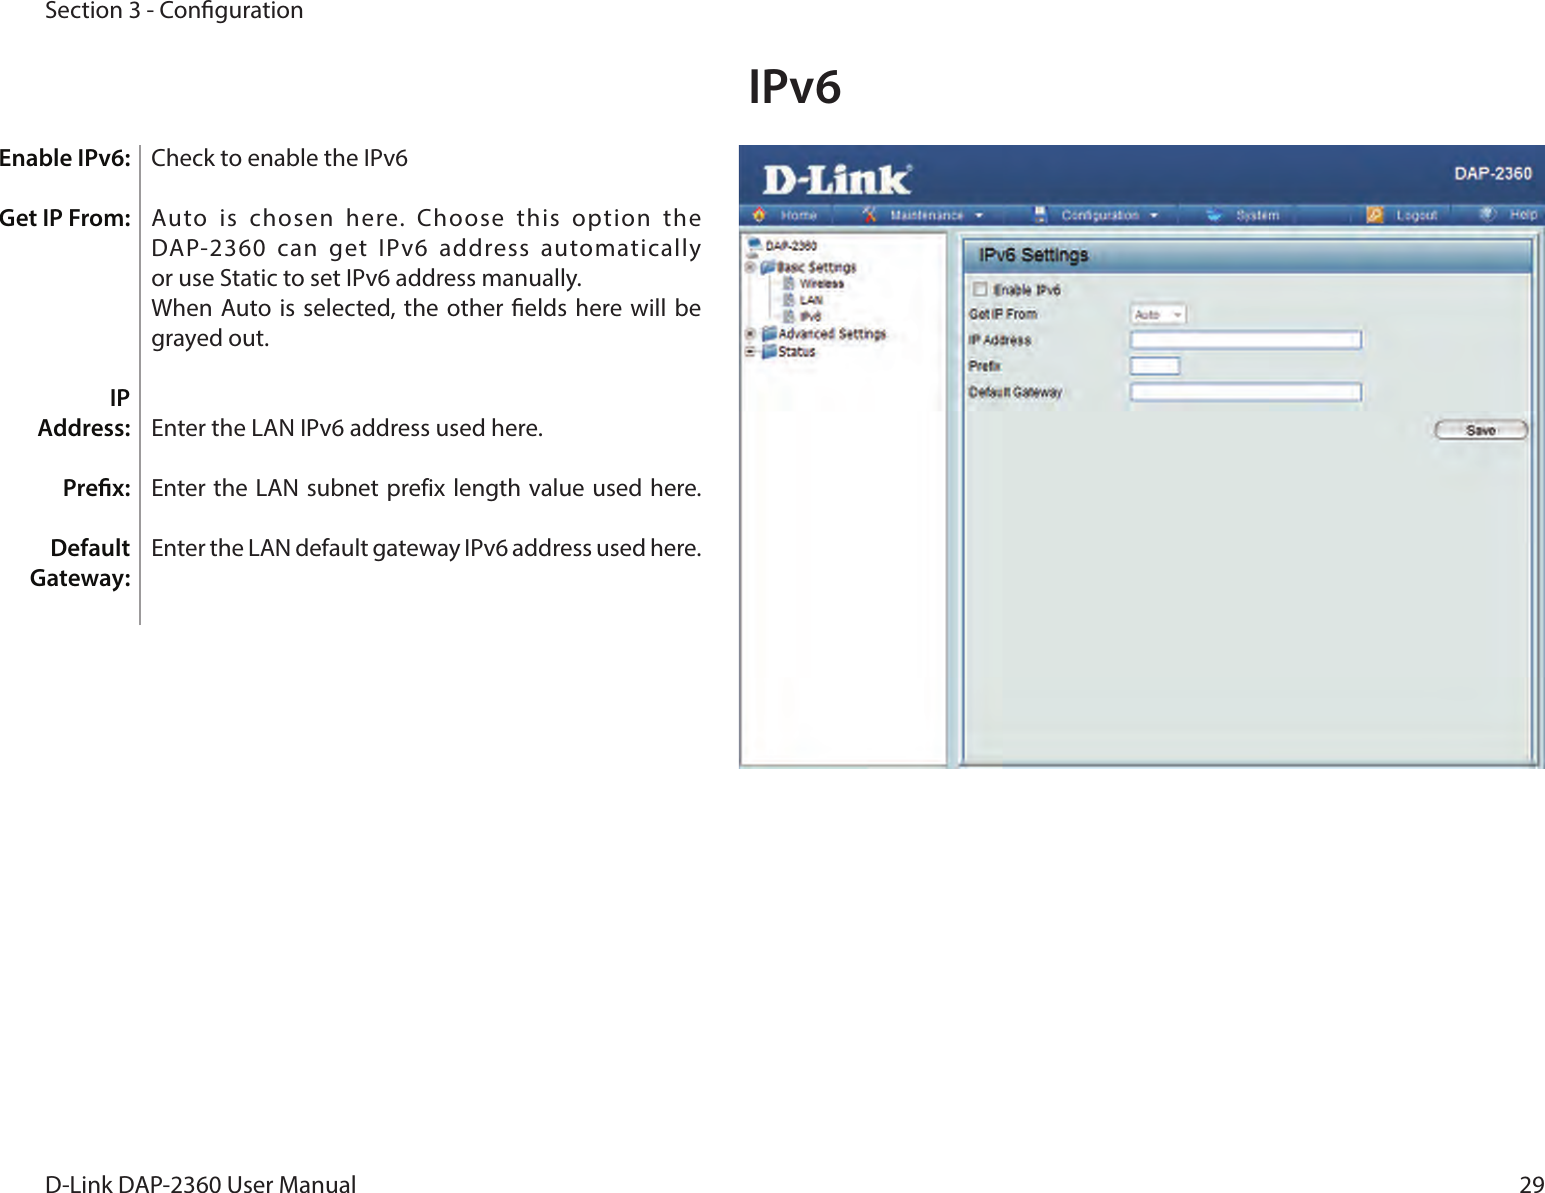 29D-Link DAP-2360 User ManualSection 3 - CongurationCheck to enable the IPv6 Auto  is  chosen  here.  Choose  this  option  the DAP-2360  can  get  IPv6  address automatically  or use Static to set IPv6 address manually.When Auto is selected,  the other  elds here will  be grayed out.Enter the LAN IPv6 address used here.Enter the LAN subnet prefix length value used here. Enter the LAN default gateway IPv6 address used here.IPv6 Enable IPv6: Get IP From:IP  Address:Prex:Default Gateway: 